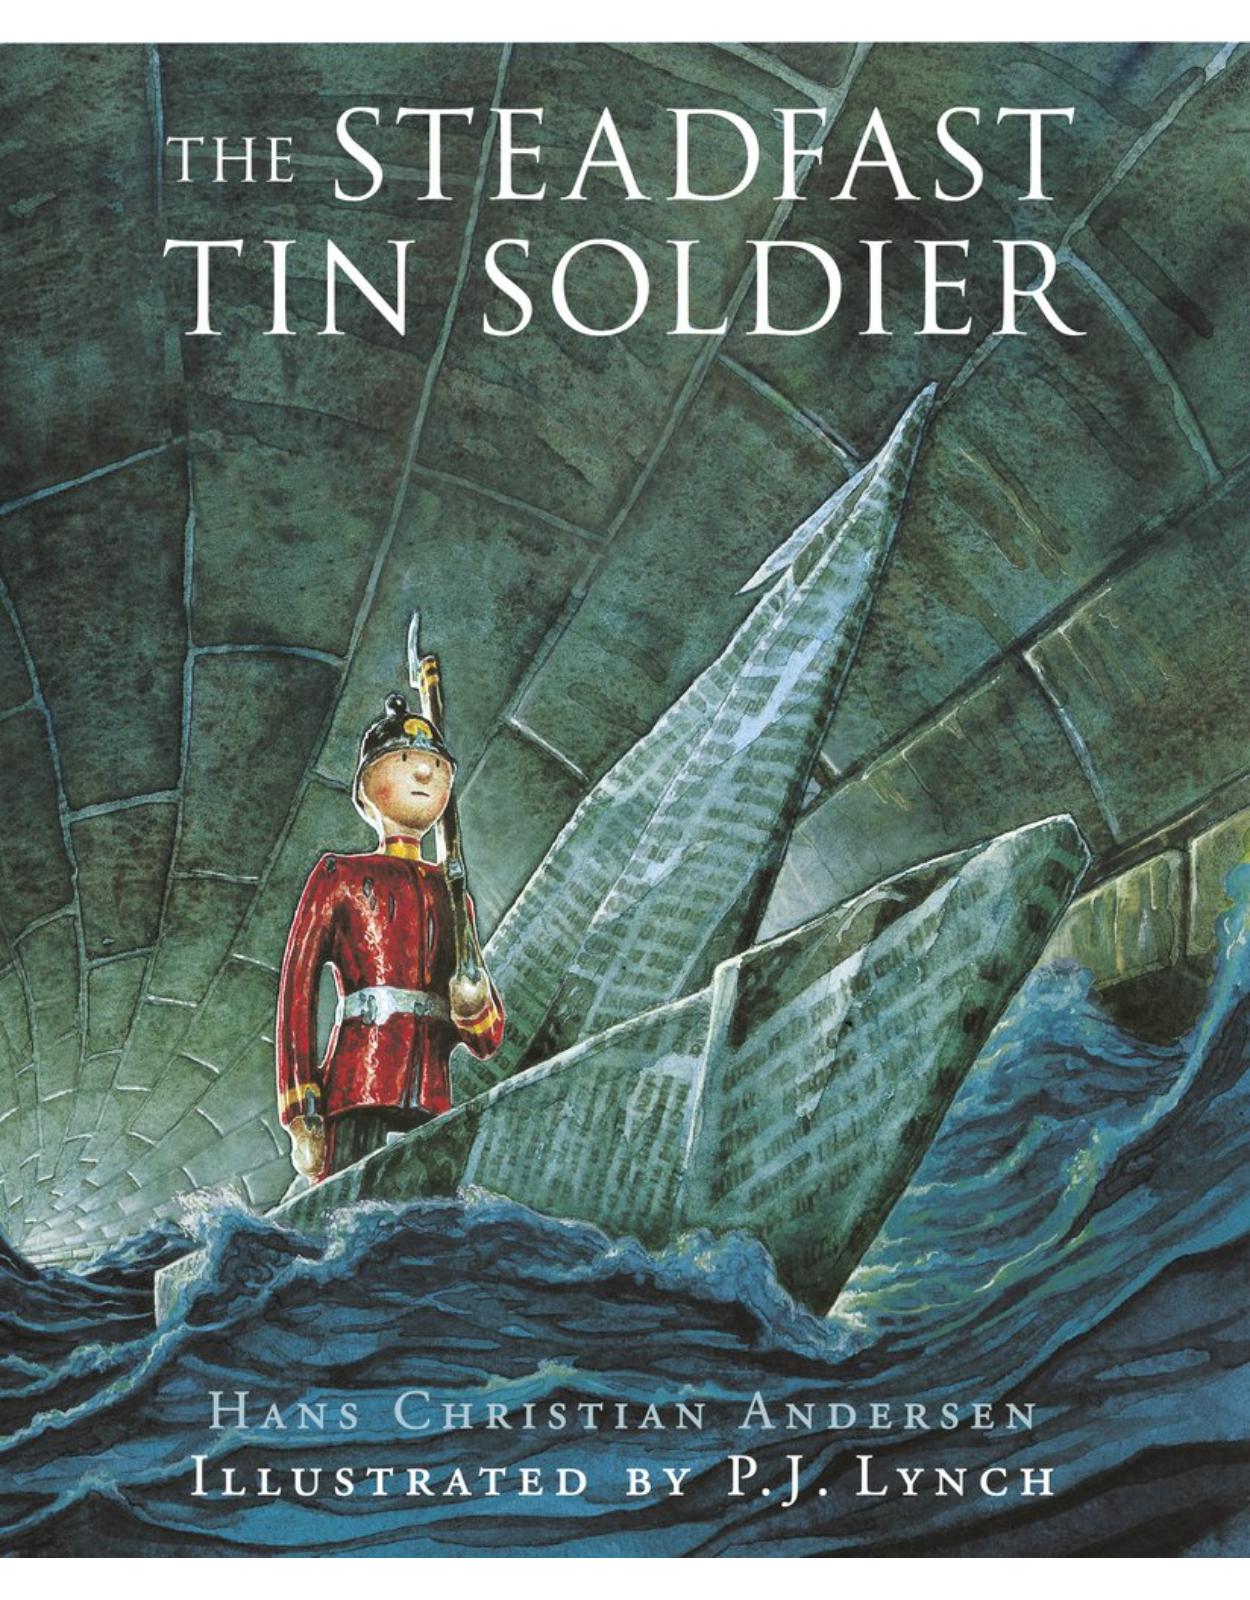 The Steadfast Tin Soldier: A retelling of Hans Christian Andersen's tale